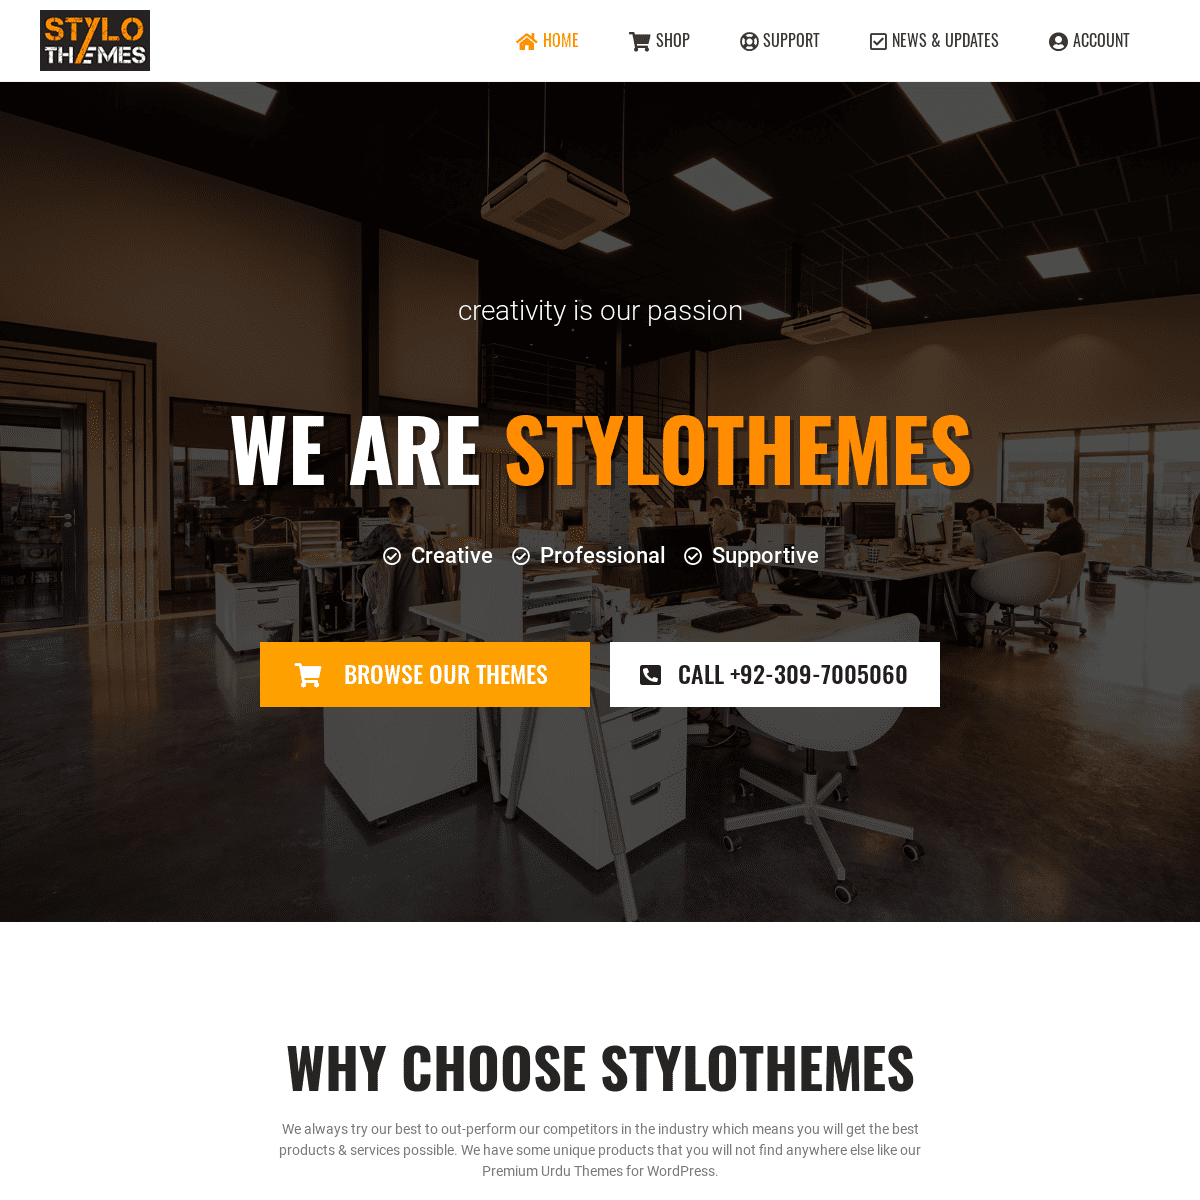 A complete backup of https://stylothemes.com